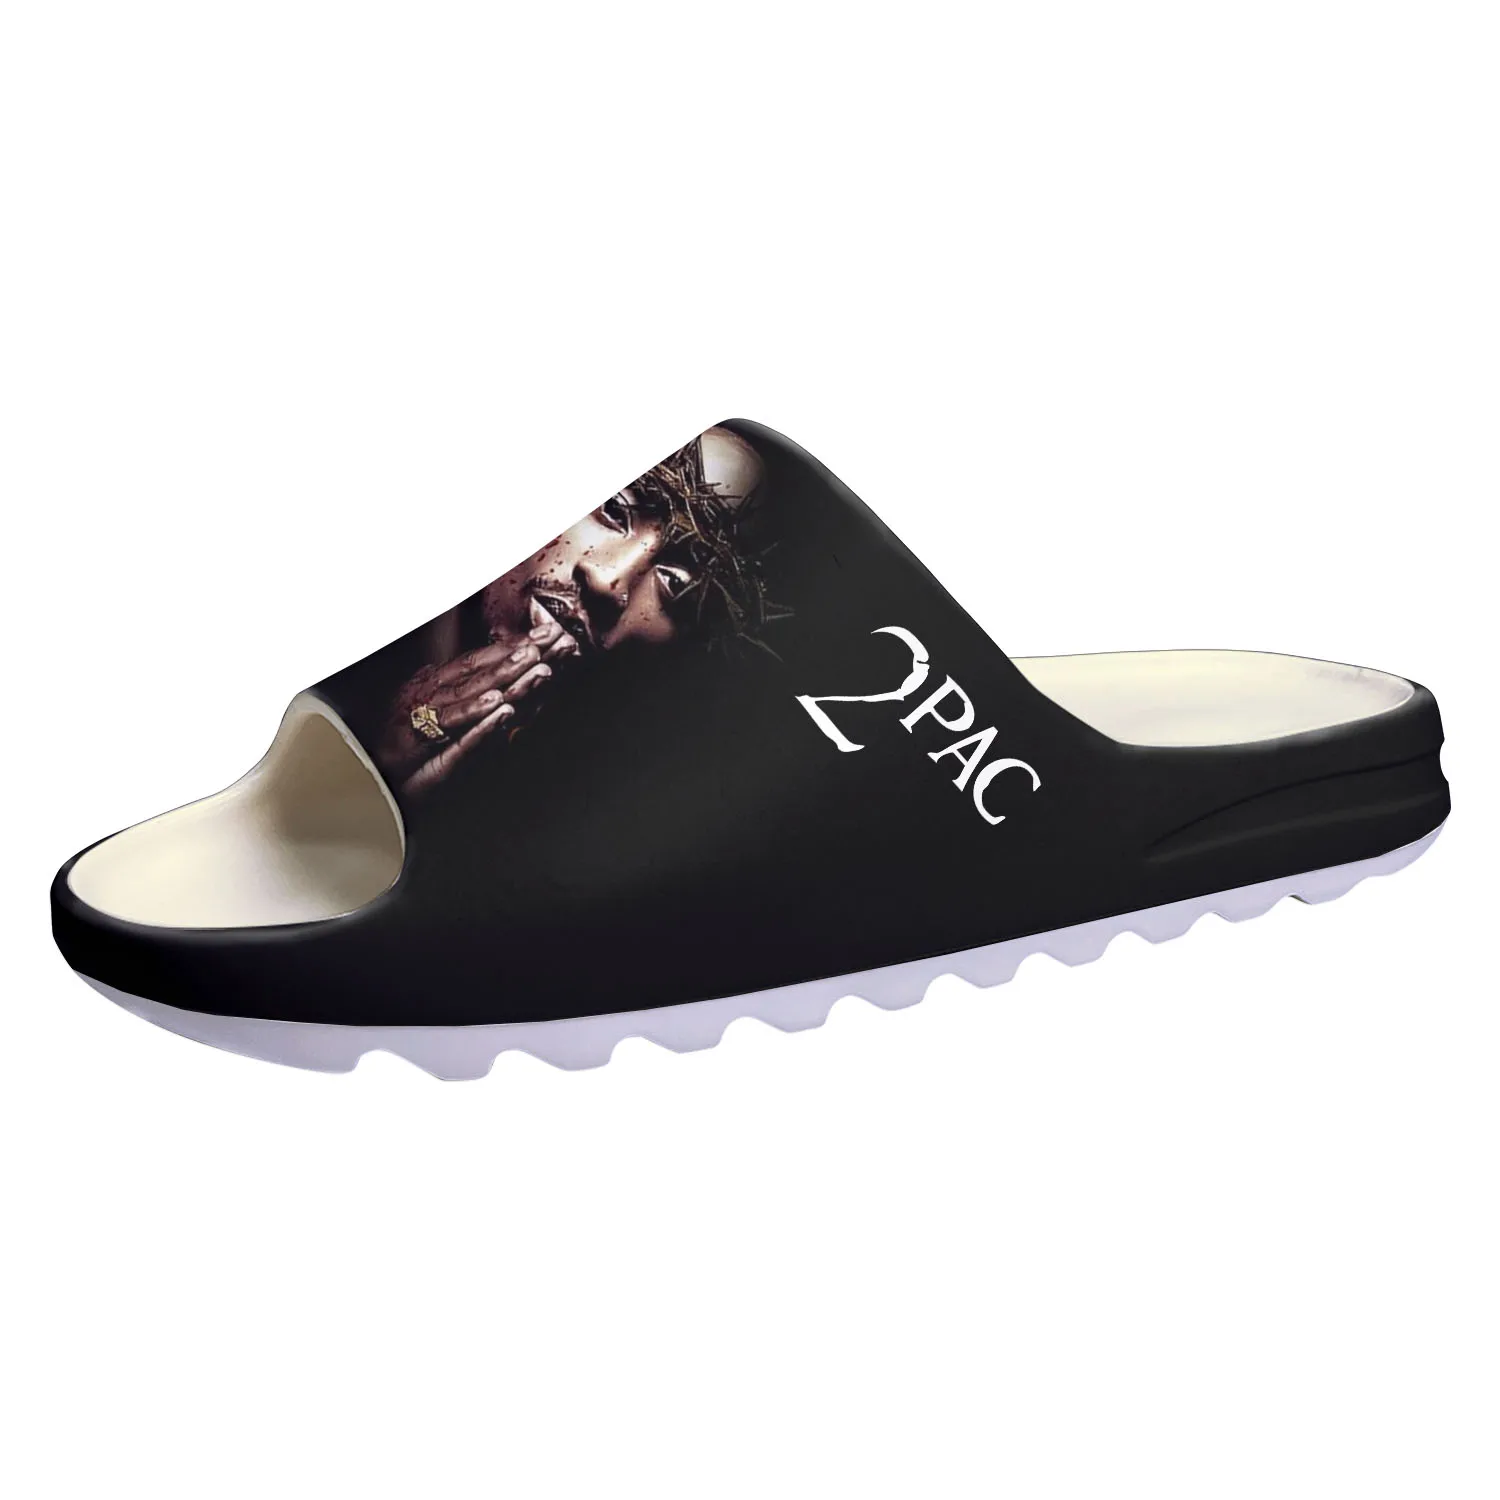 

2Pac Hip Hop Rapper Tupac Soft Sole Sllipers Home Clogs Step on Water Shoes Mens Womens Teenager Customize on Shit Sandals Pop